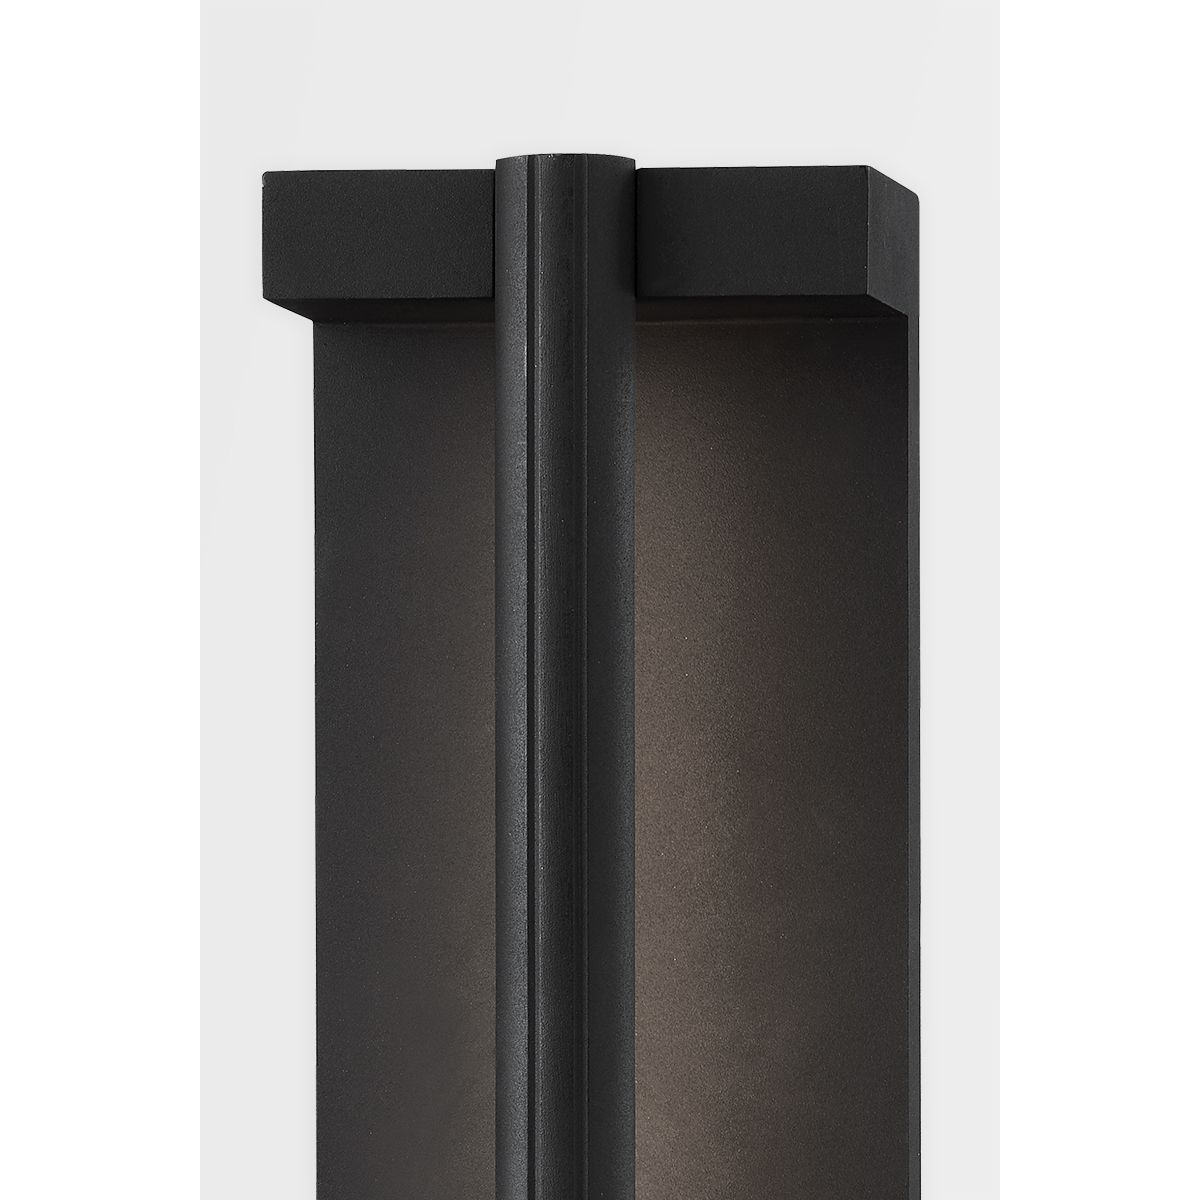 Calla 22 in. LED Outdoor Wall Sconce Textured Black Finish